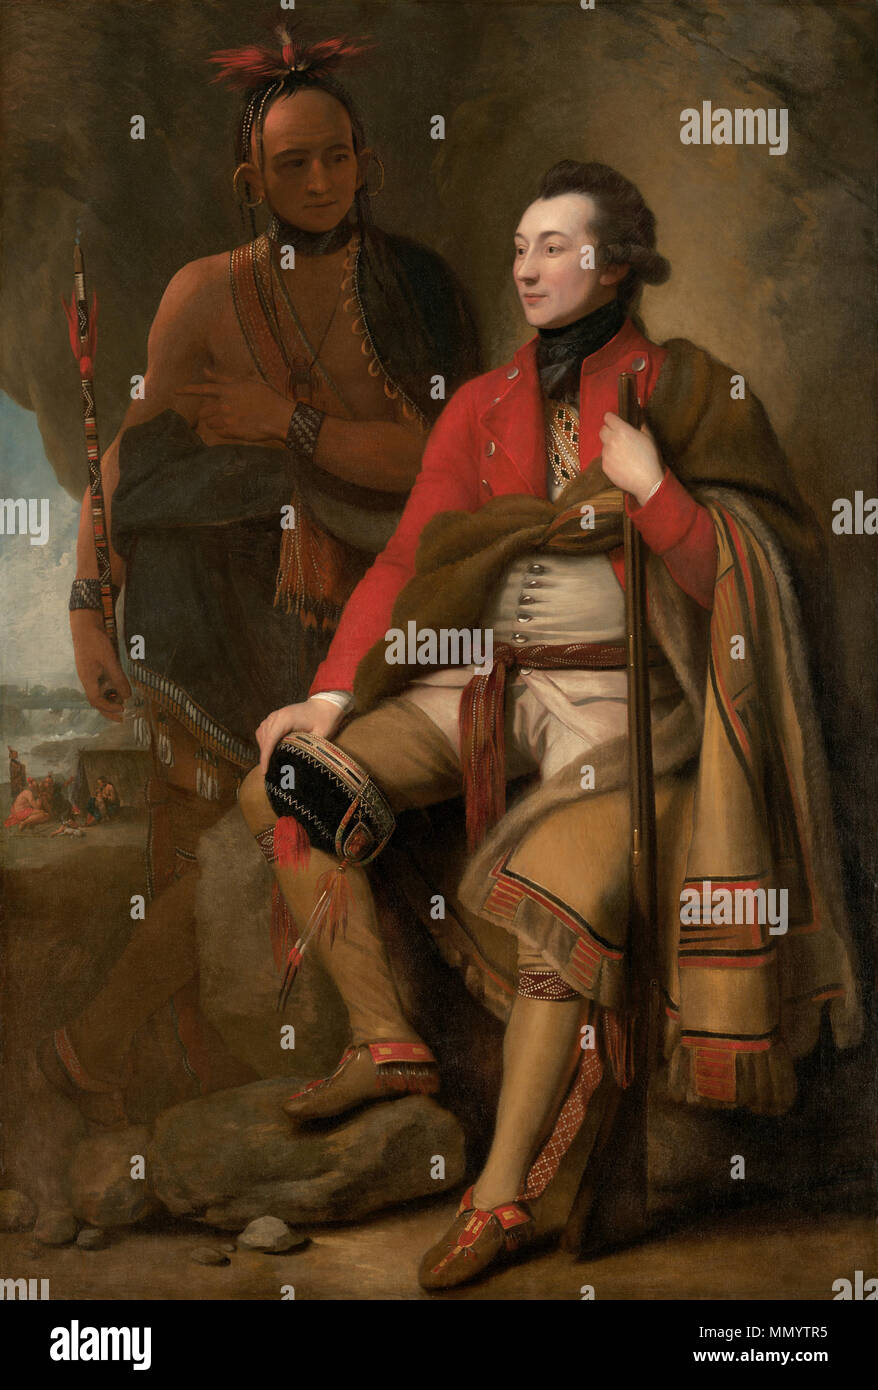 Painting; oil on canvas; overall: 202 x 138 cm (79 1/2 x 54 5/16 in.) framed: 222.6 x 160 x 9.5 cm (87 5/8 x 63 x 3 3/4 in.); Guy Johnson by Benjamin West Stock Photo